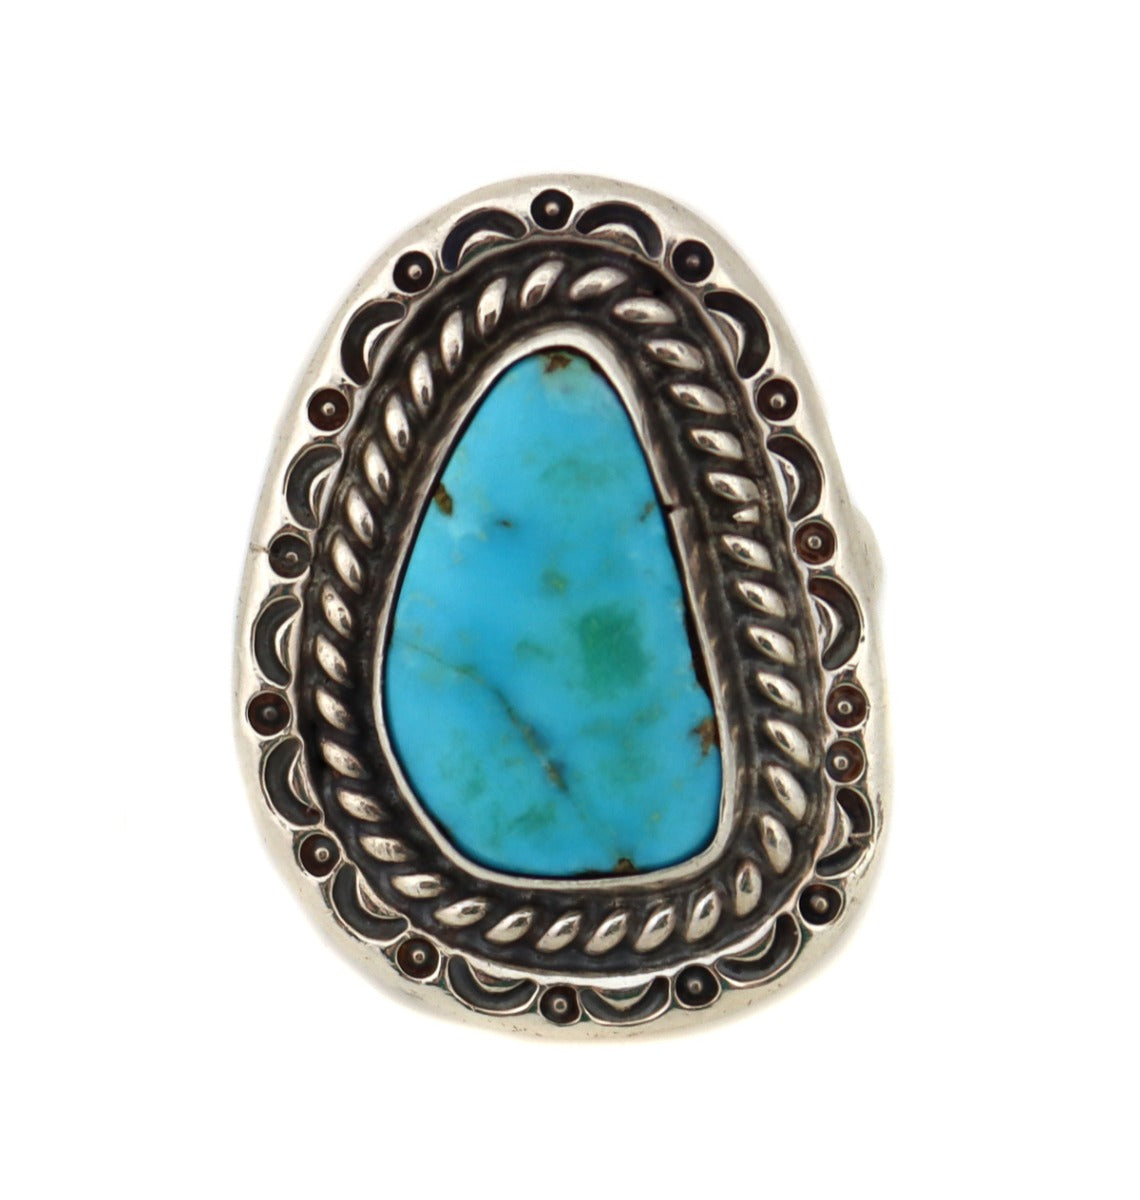 Sam Lovato (1935-1999) - Santo Domingo Turquoise and Silver Ring c.1960-70s, size 9.5 (J14759-CO-074)